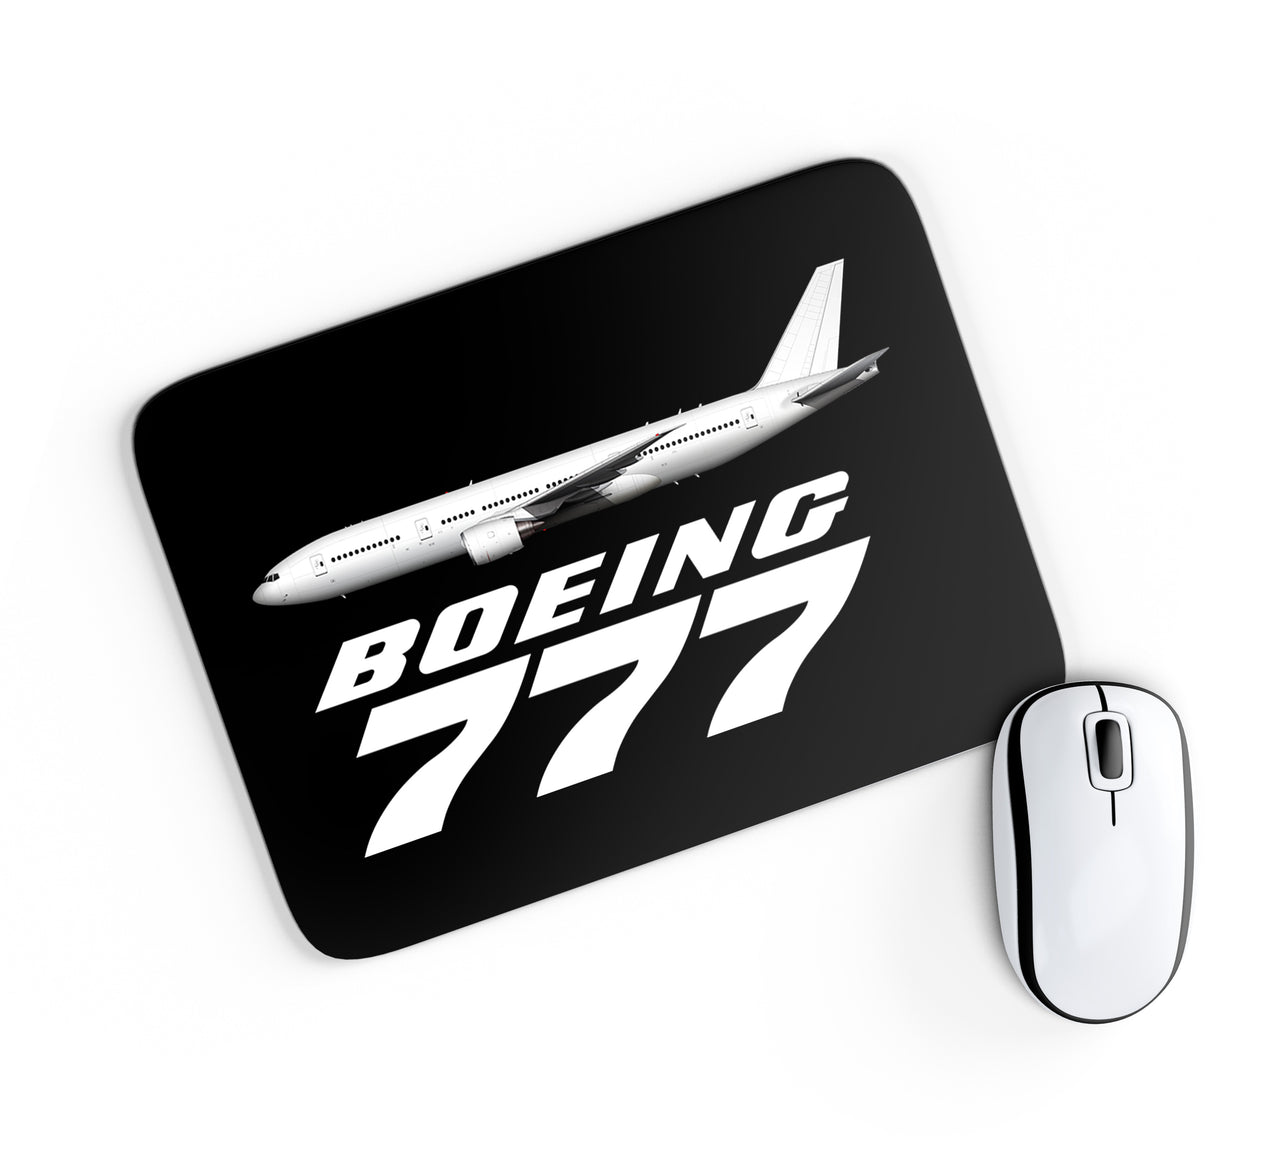 The Boeing 777 Designed Mouse Pads